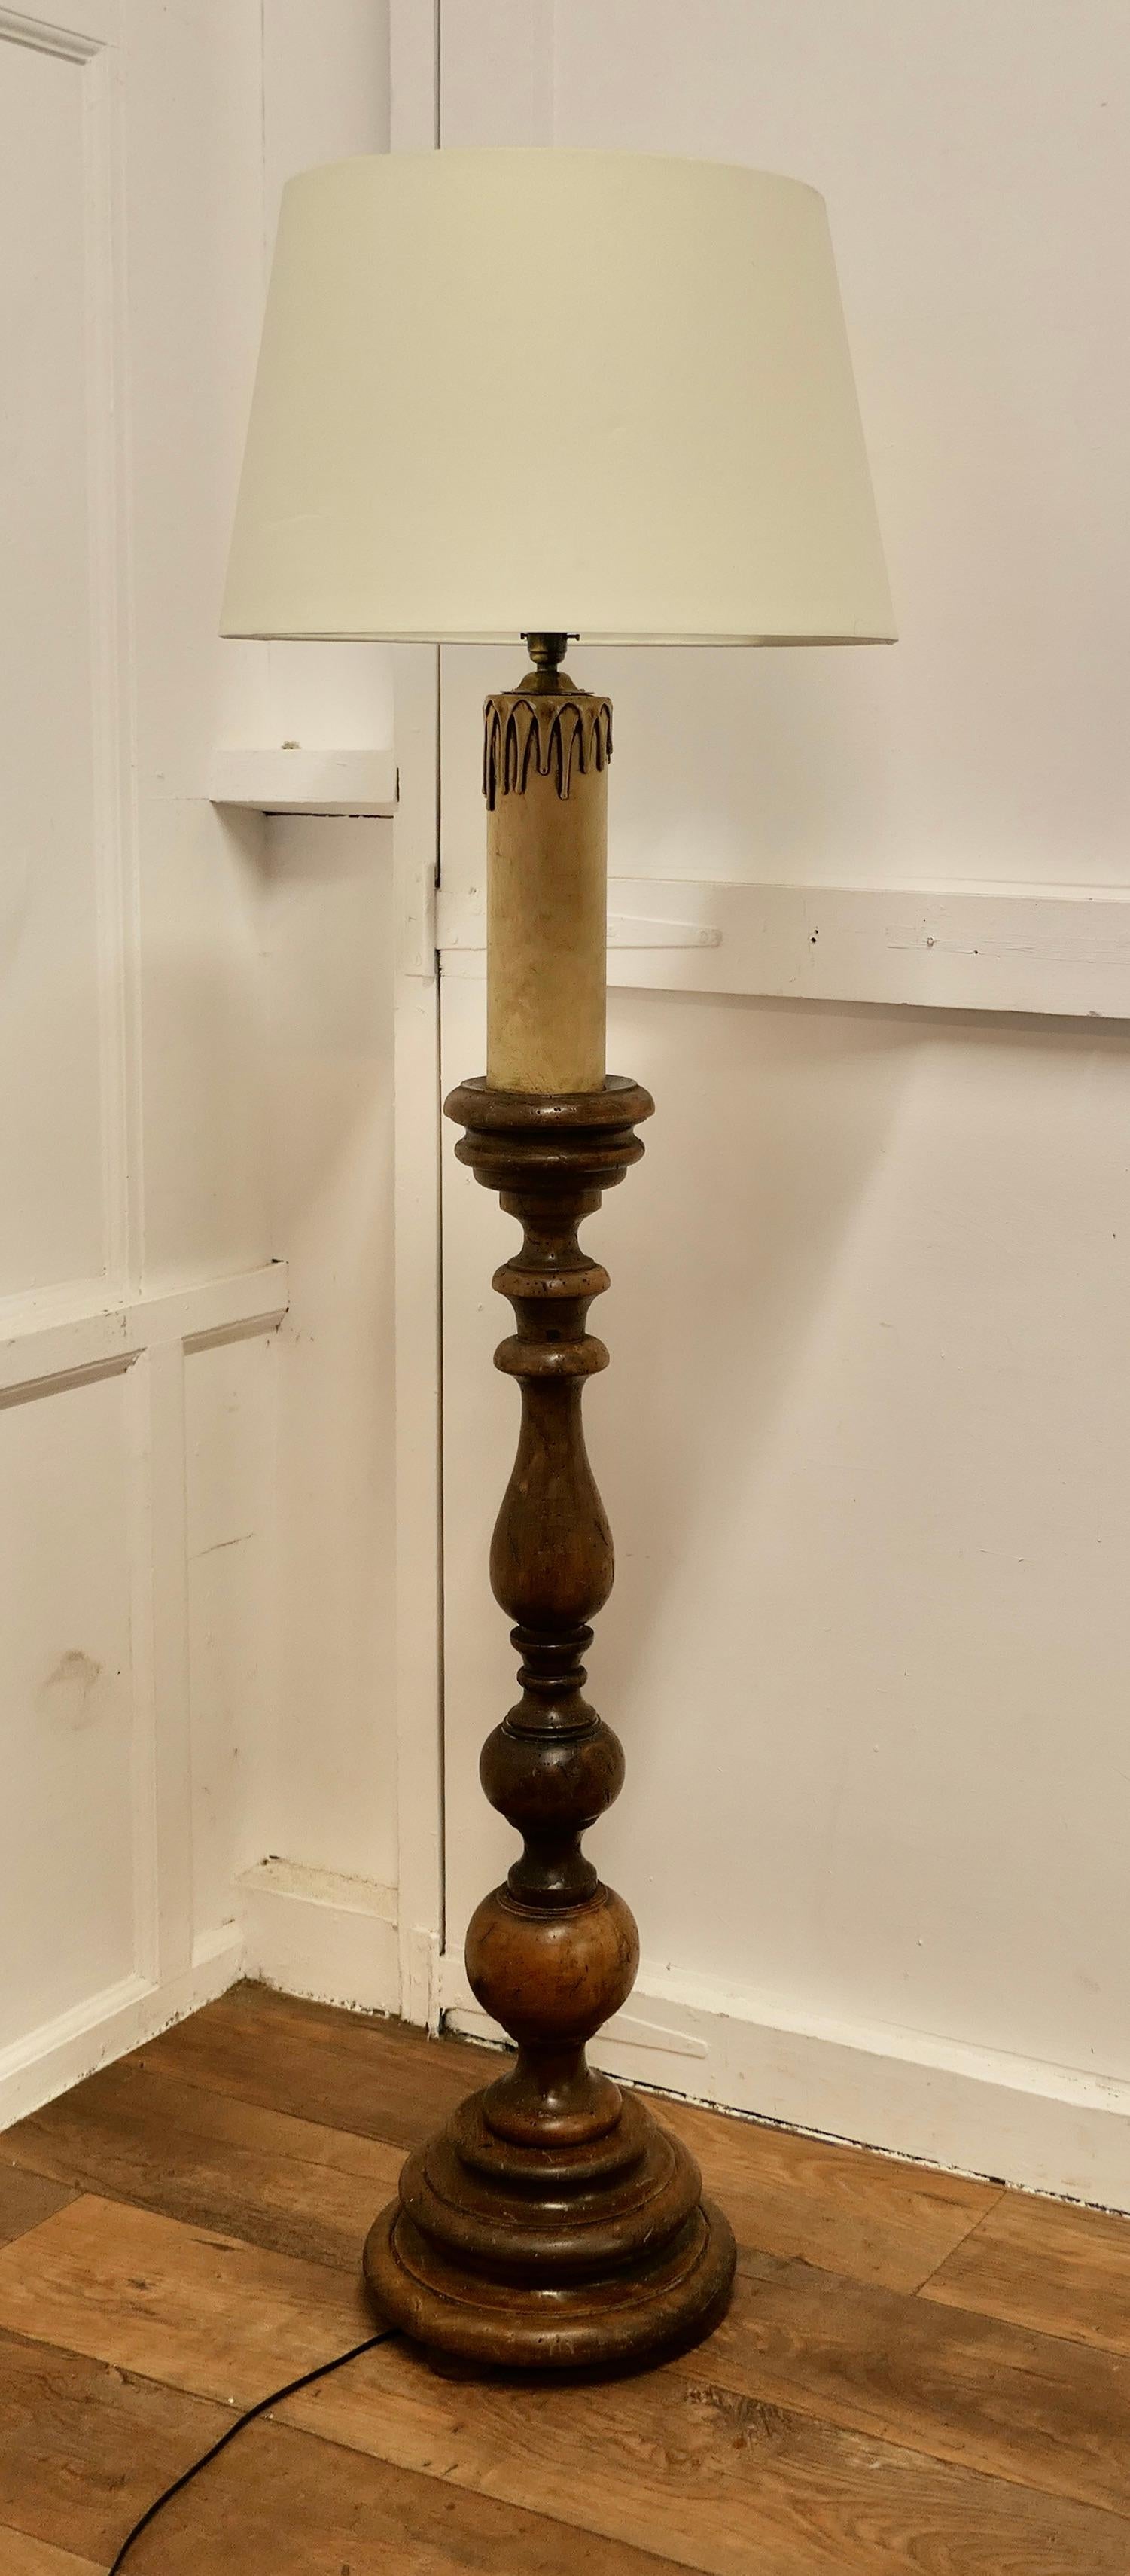 Chunky French Chestnut Standard Floor Lamp 

This lamp is a good country piece, with a very bulbous turned Chestnut central column
The lamp is in good condition, working and with a new parchment lampshade

The lamp is 56” tall, the base is 12” in